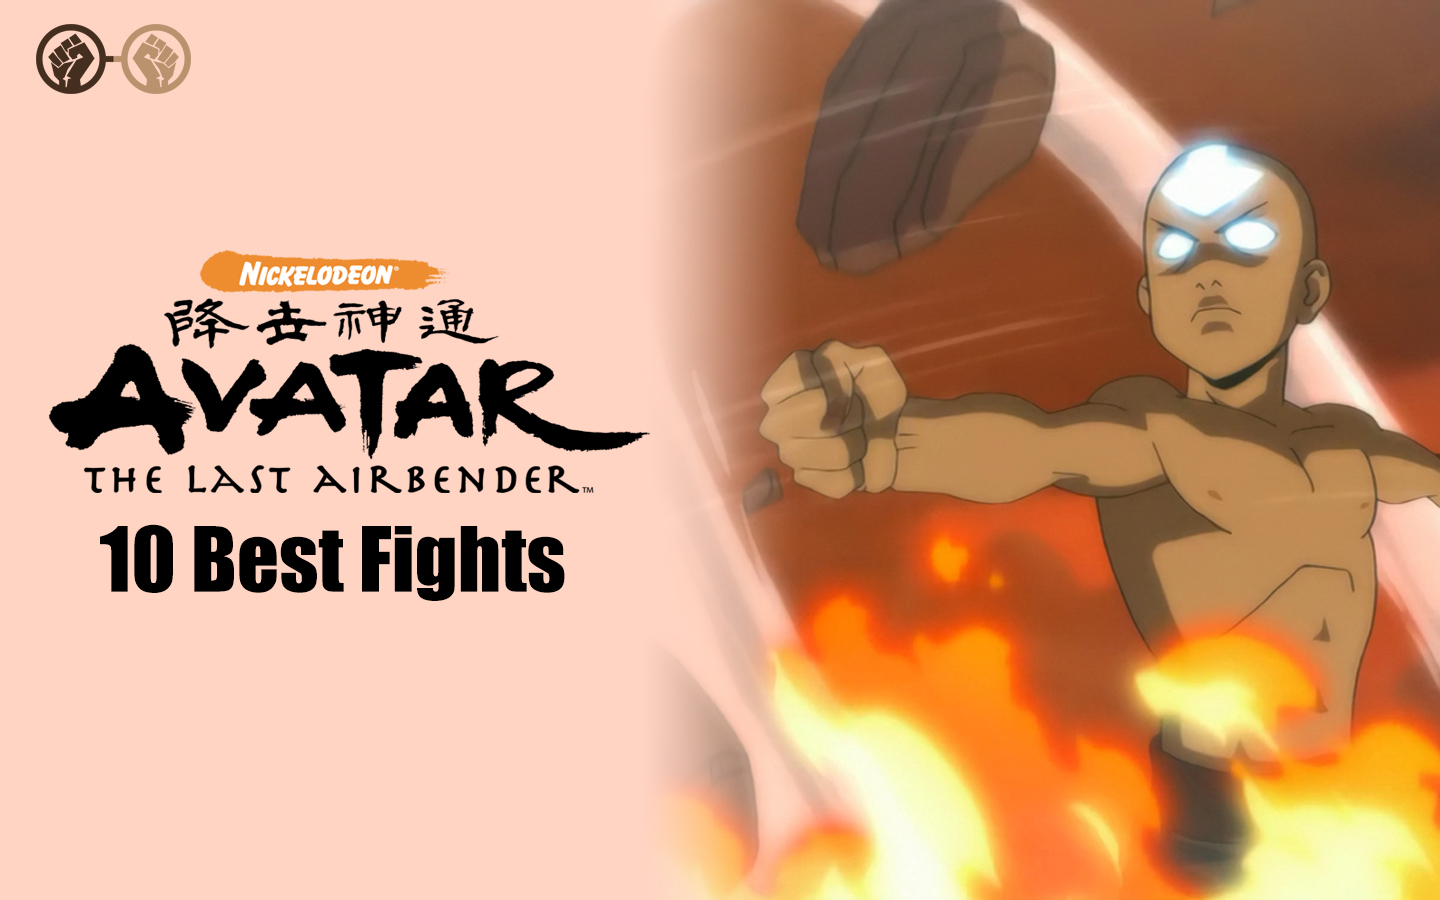 10 of The Best Fight Scenes in ‘Avatar: The Last Airbender’